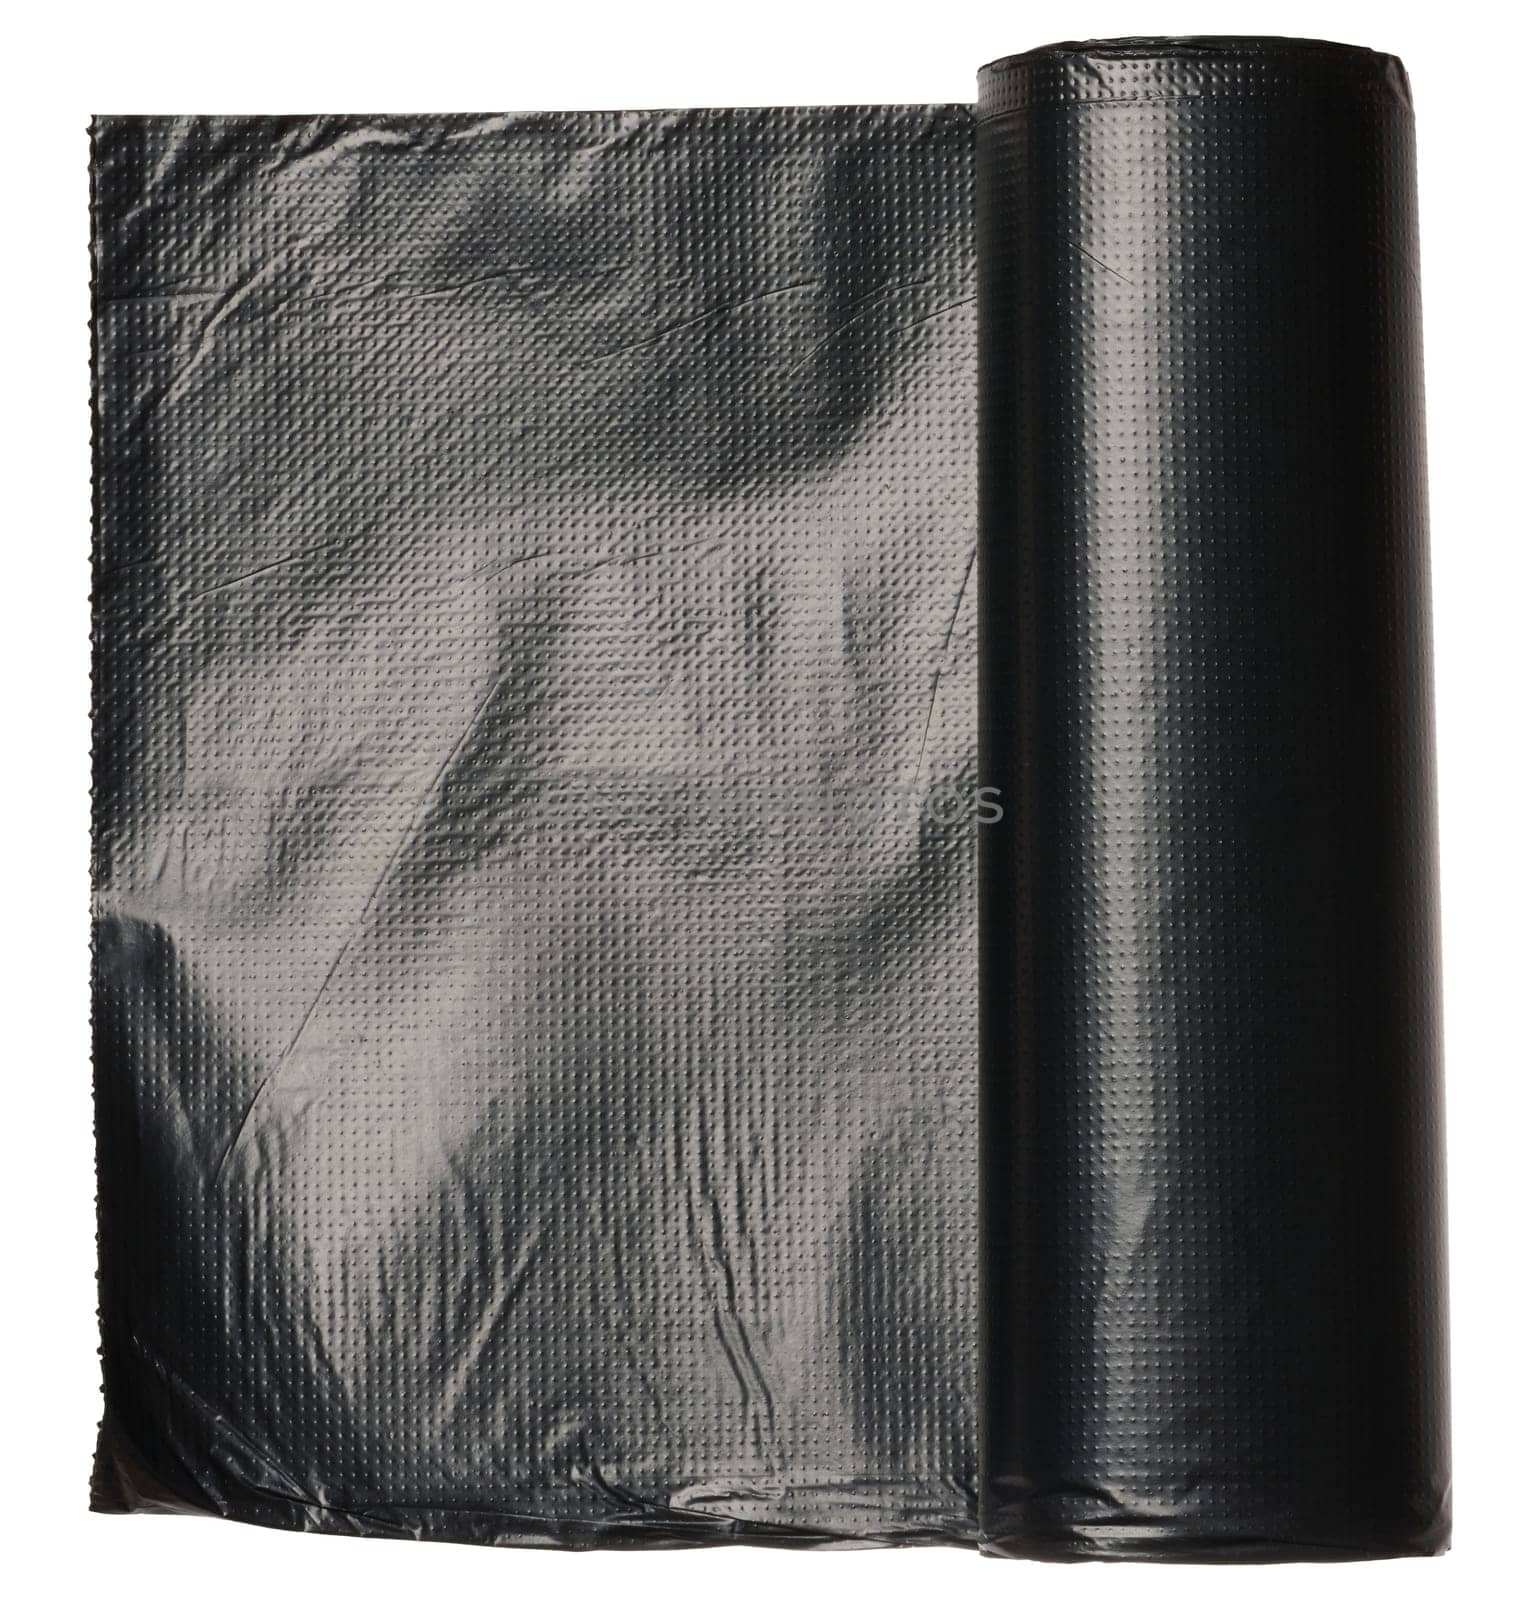 Roll of black plastic bags on isolated background by ndanko